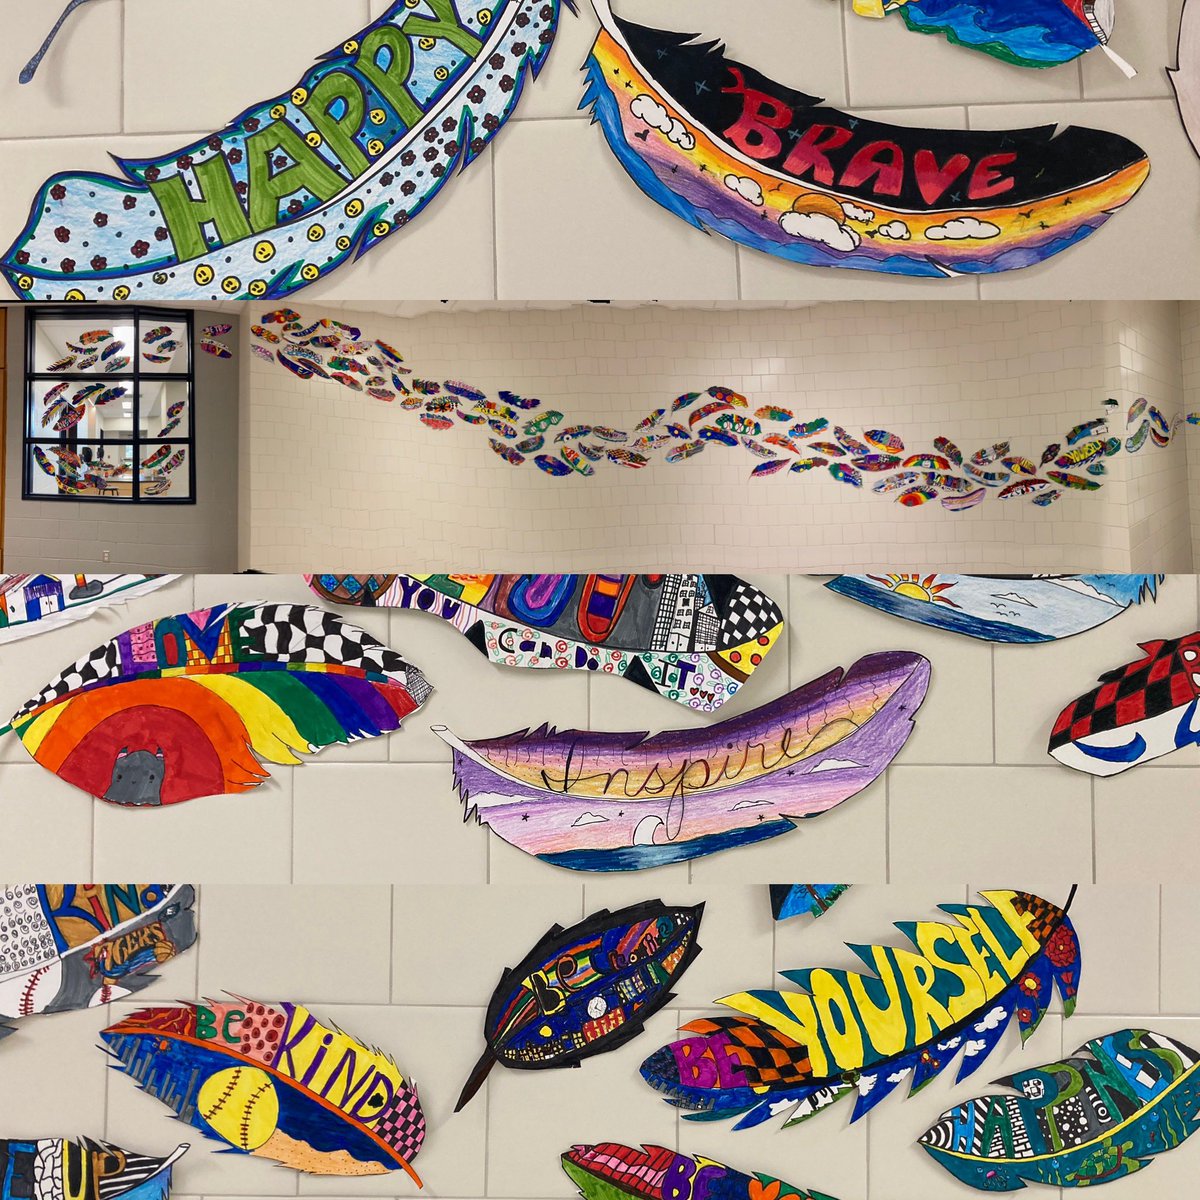 'Hallway Art': feathers with positive words to spread some positivity (like feathers blowing in the wind) This project teaches the students a positive way to create change through Art #basdarts #basdproud #nitschmannartlund @NitschmannMS @NMSTeamPitt @BethlehemAreaSD